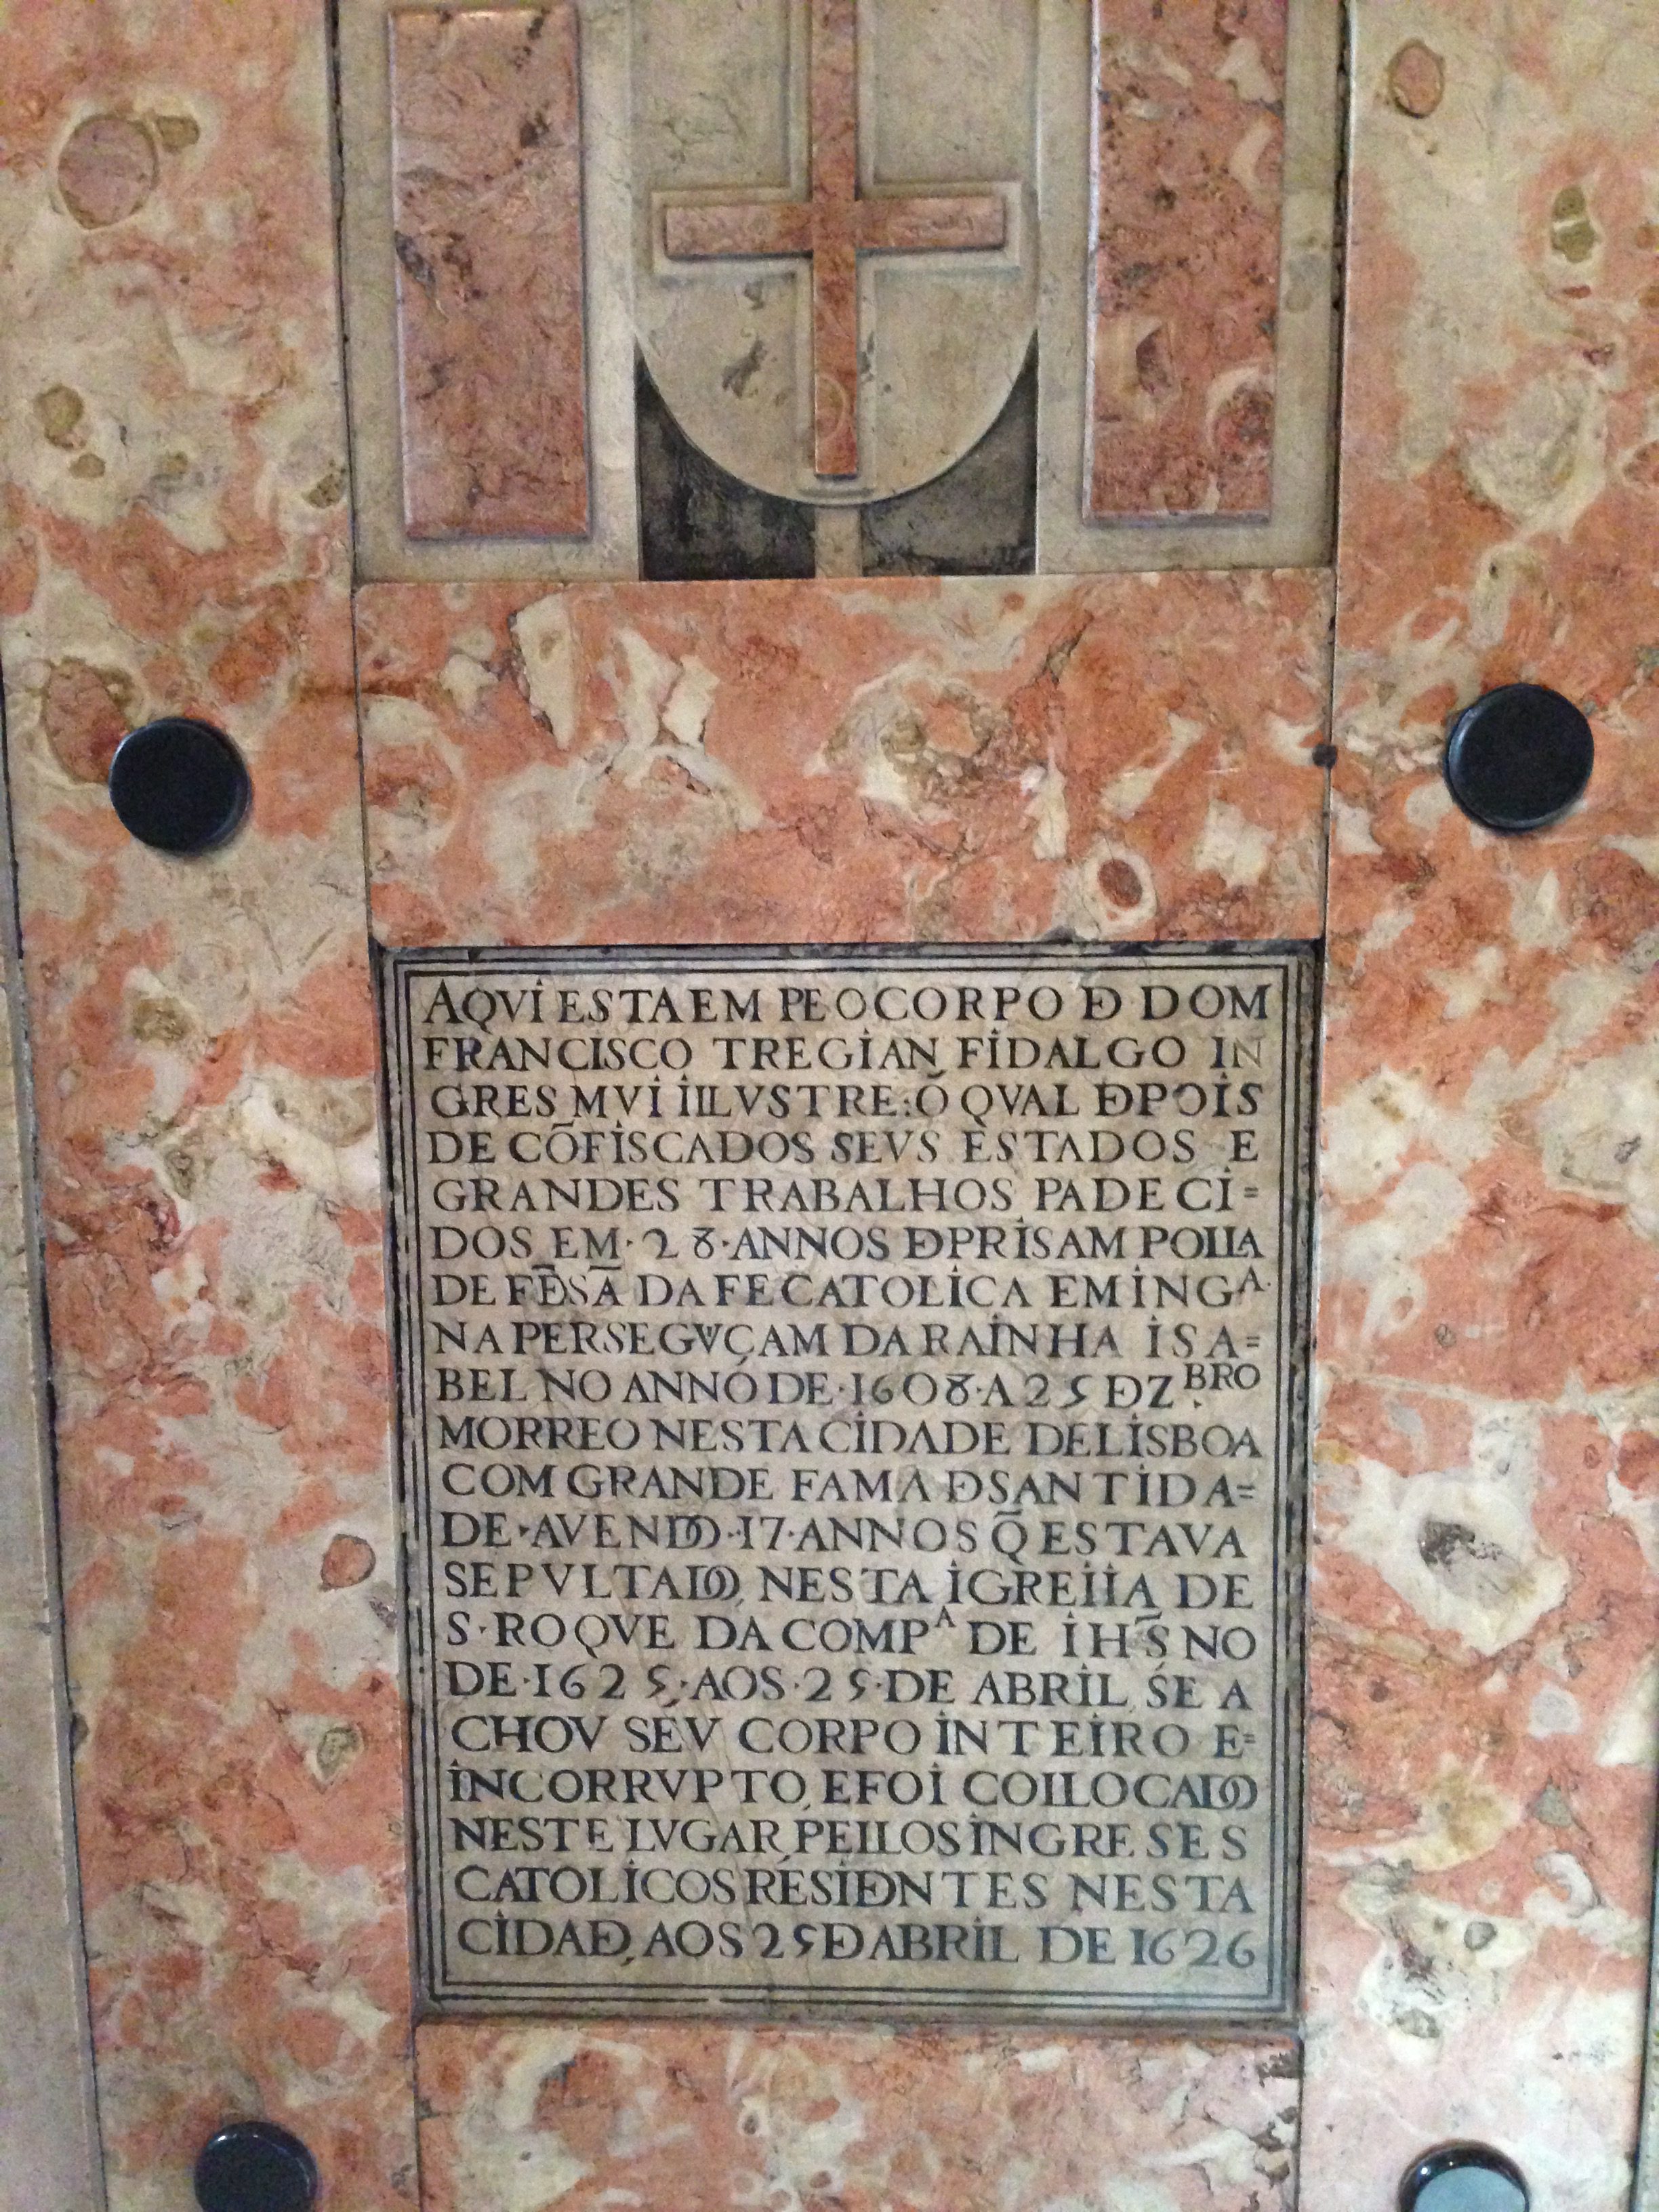 The inscription to the tomb of Francis Tegian in Saint Roch Church, Lisbon.